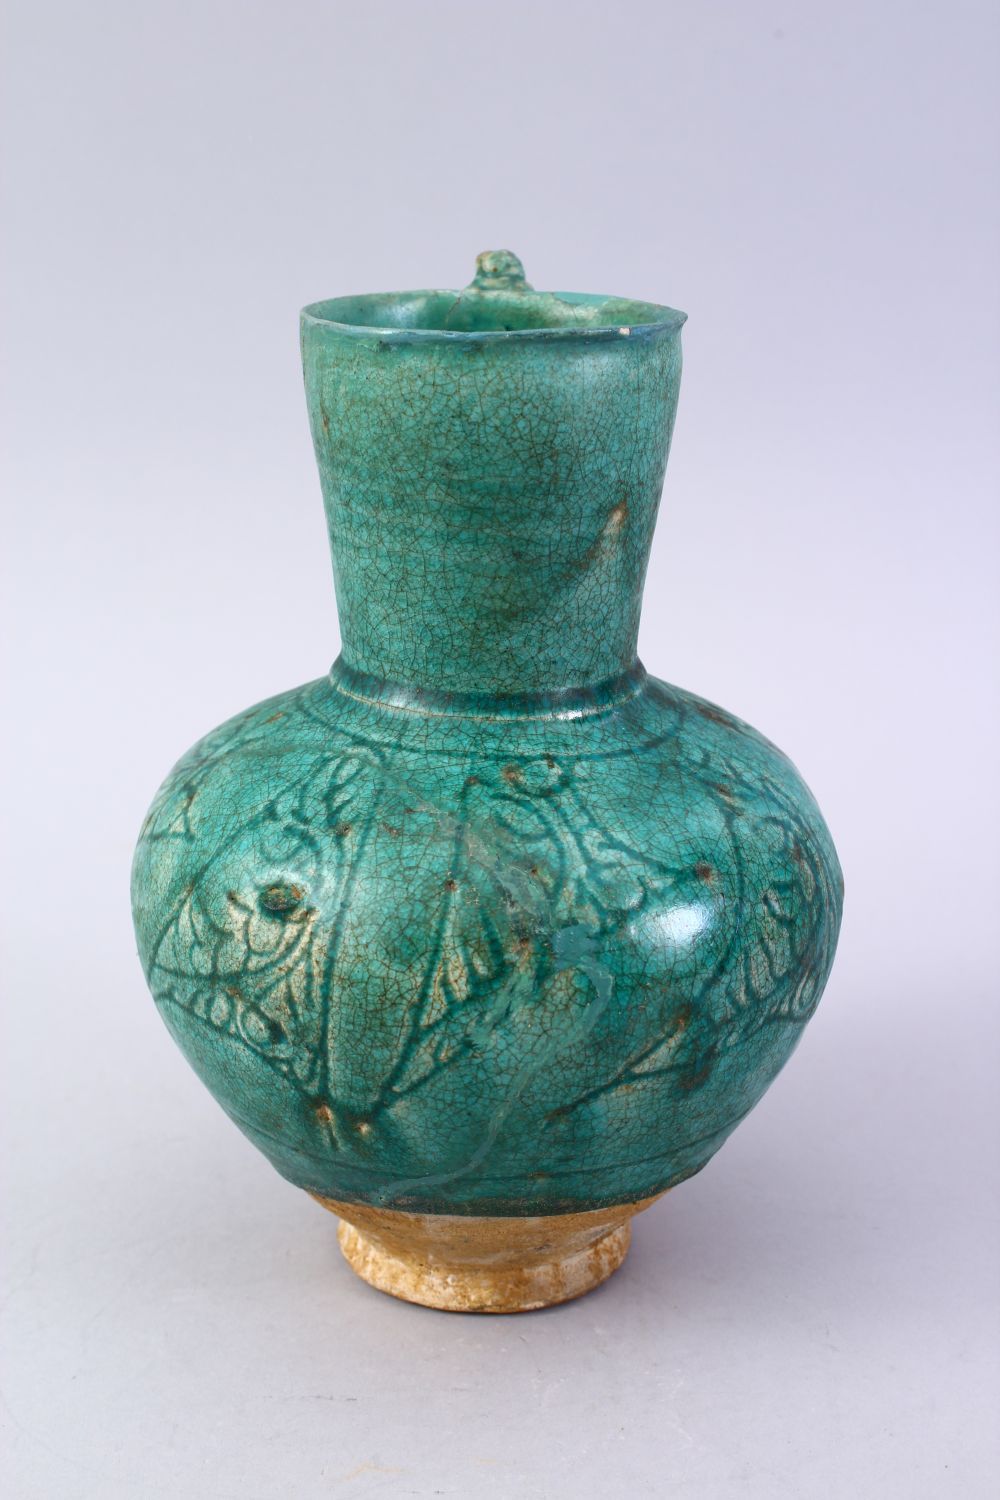 A GOOD EARLY ISLAMIC TURQUOISE GLAZED POTTERY JUG, 22cm high. - Image 2 of 9